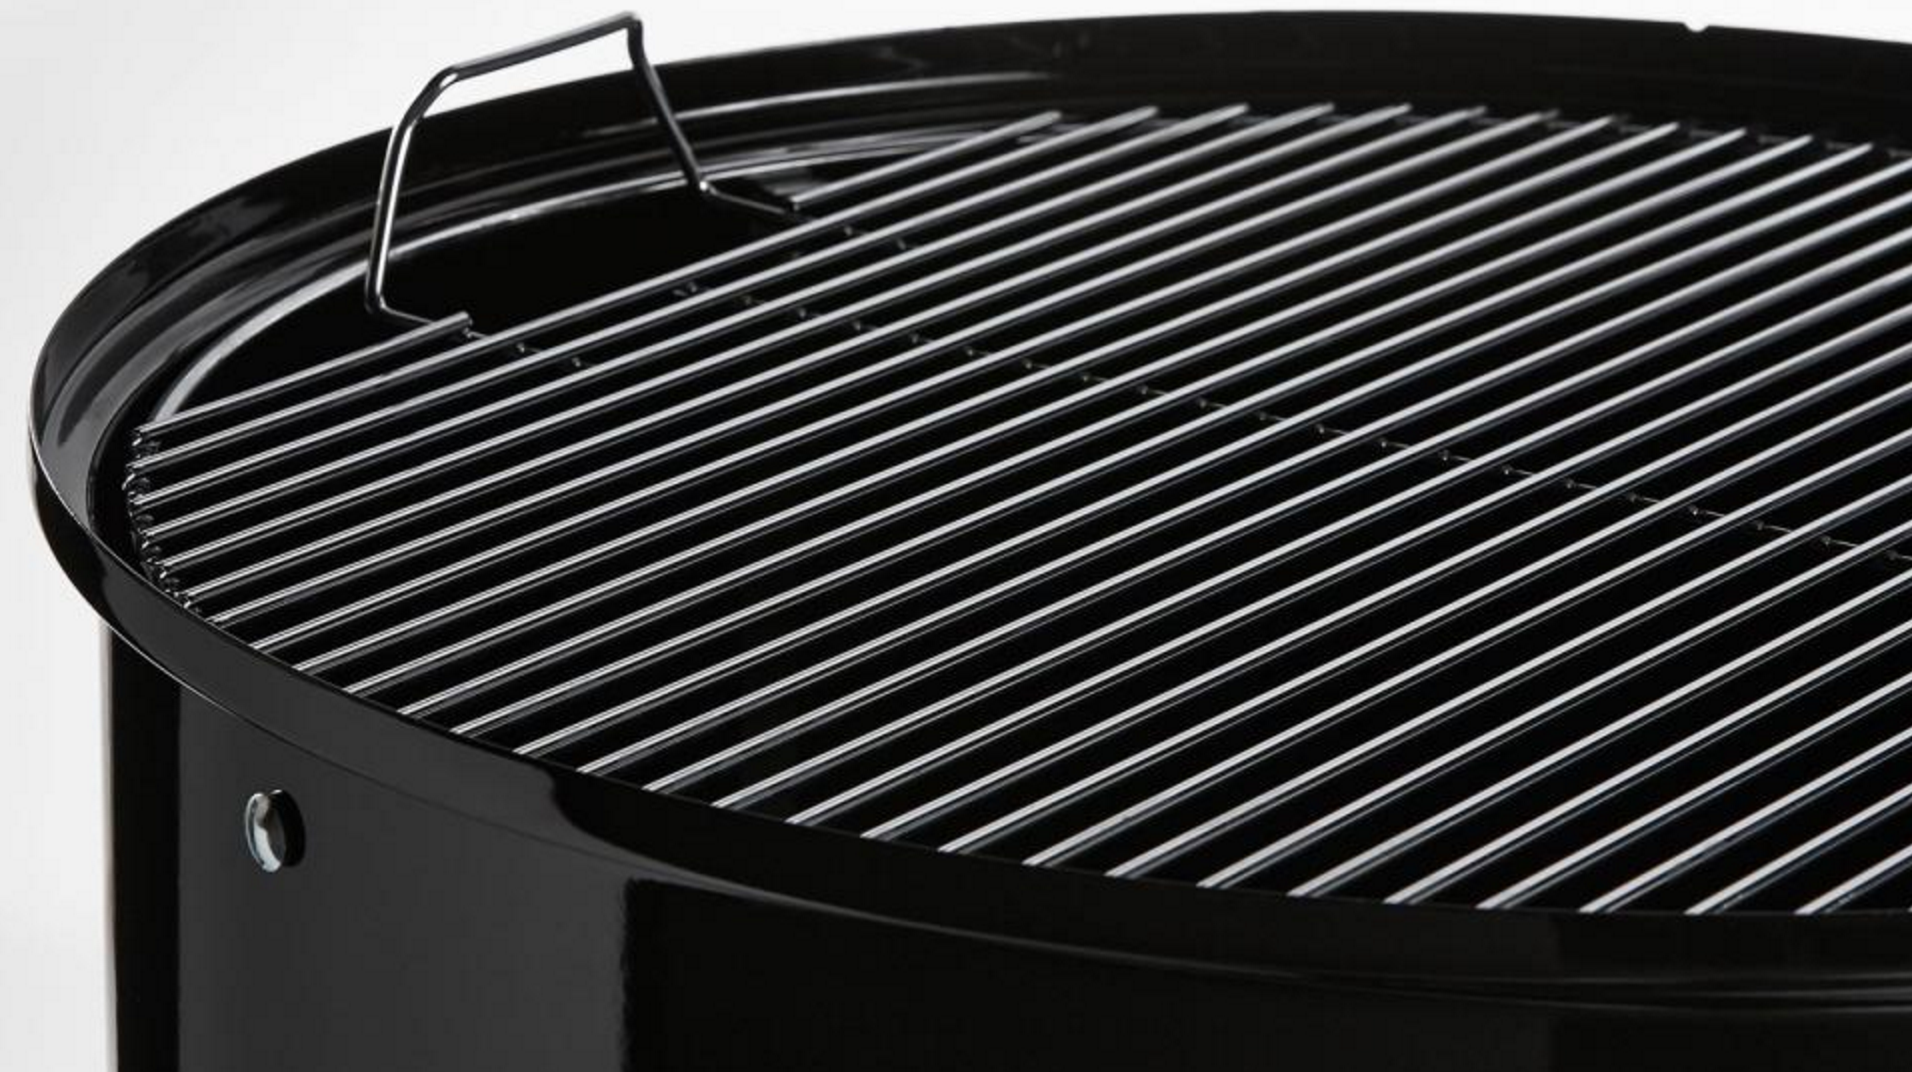 Plated steel cooking grates